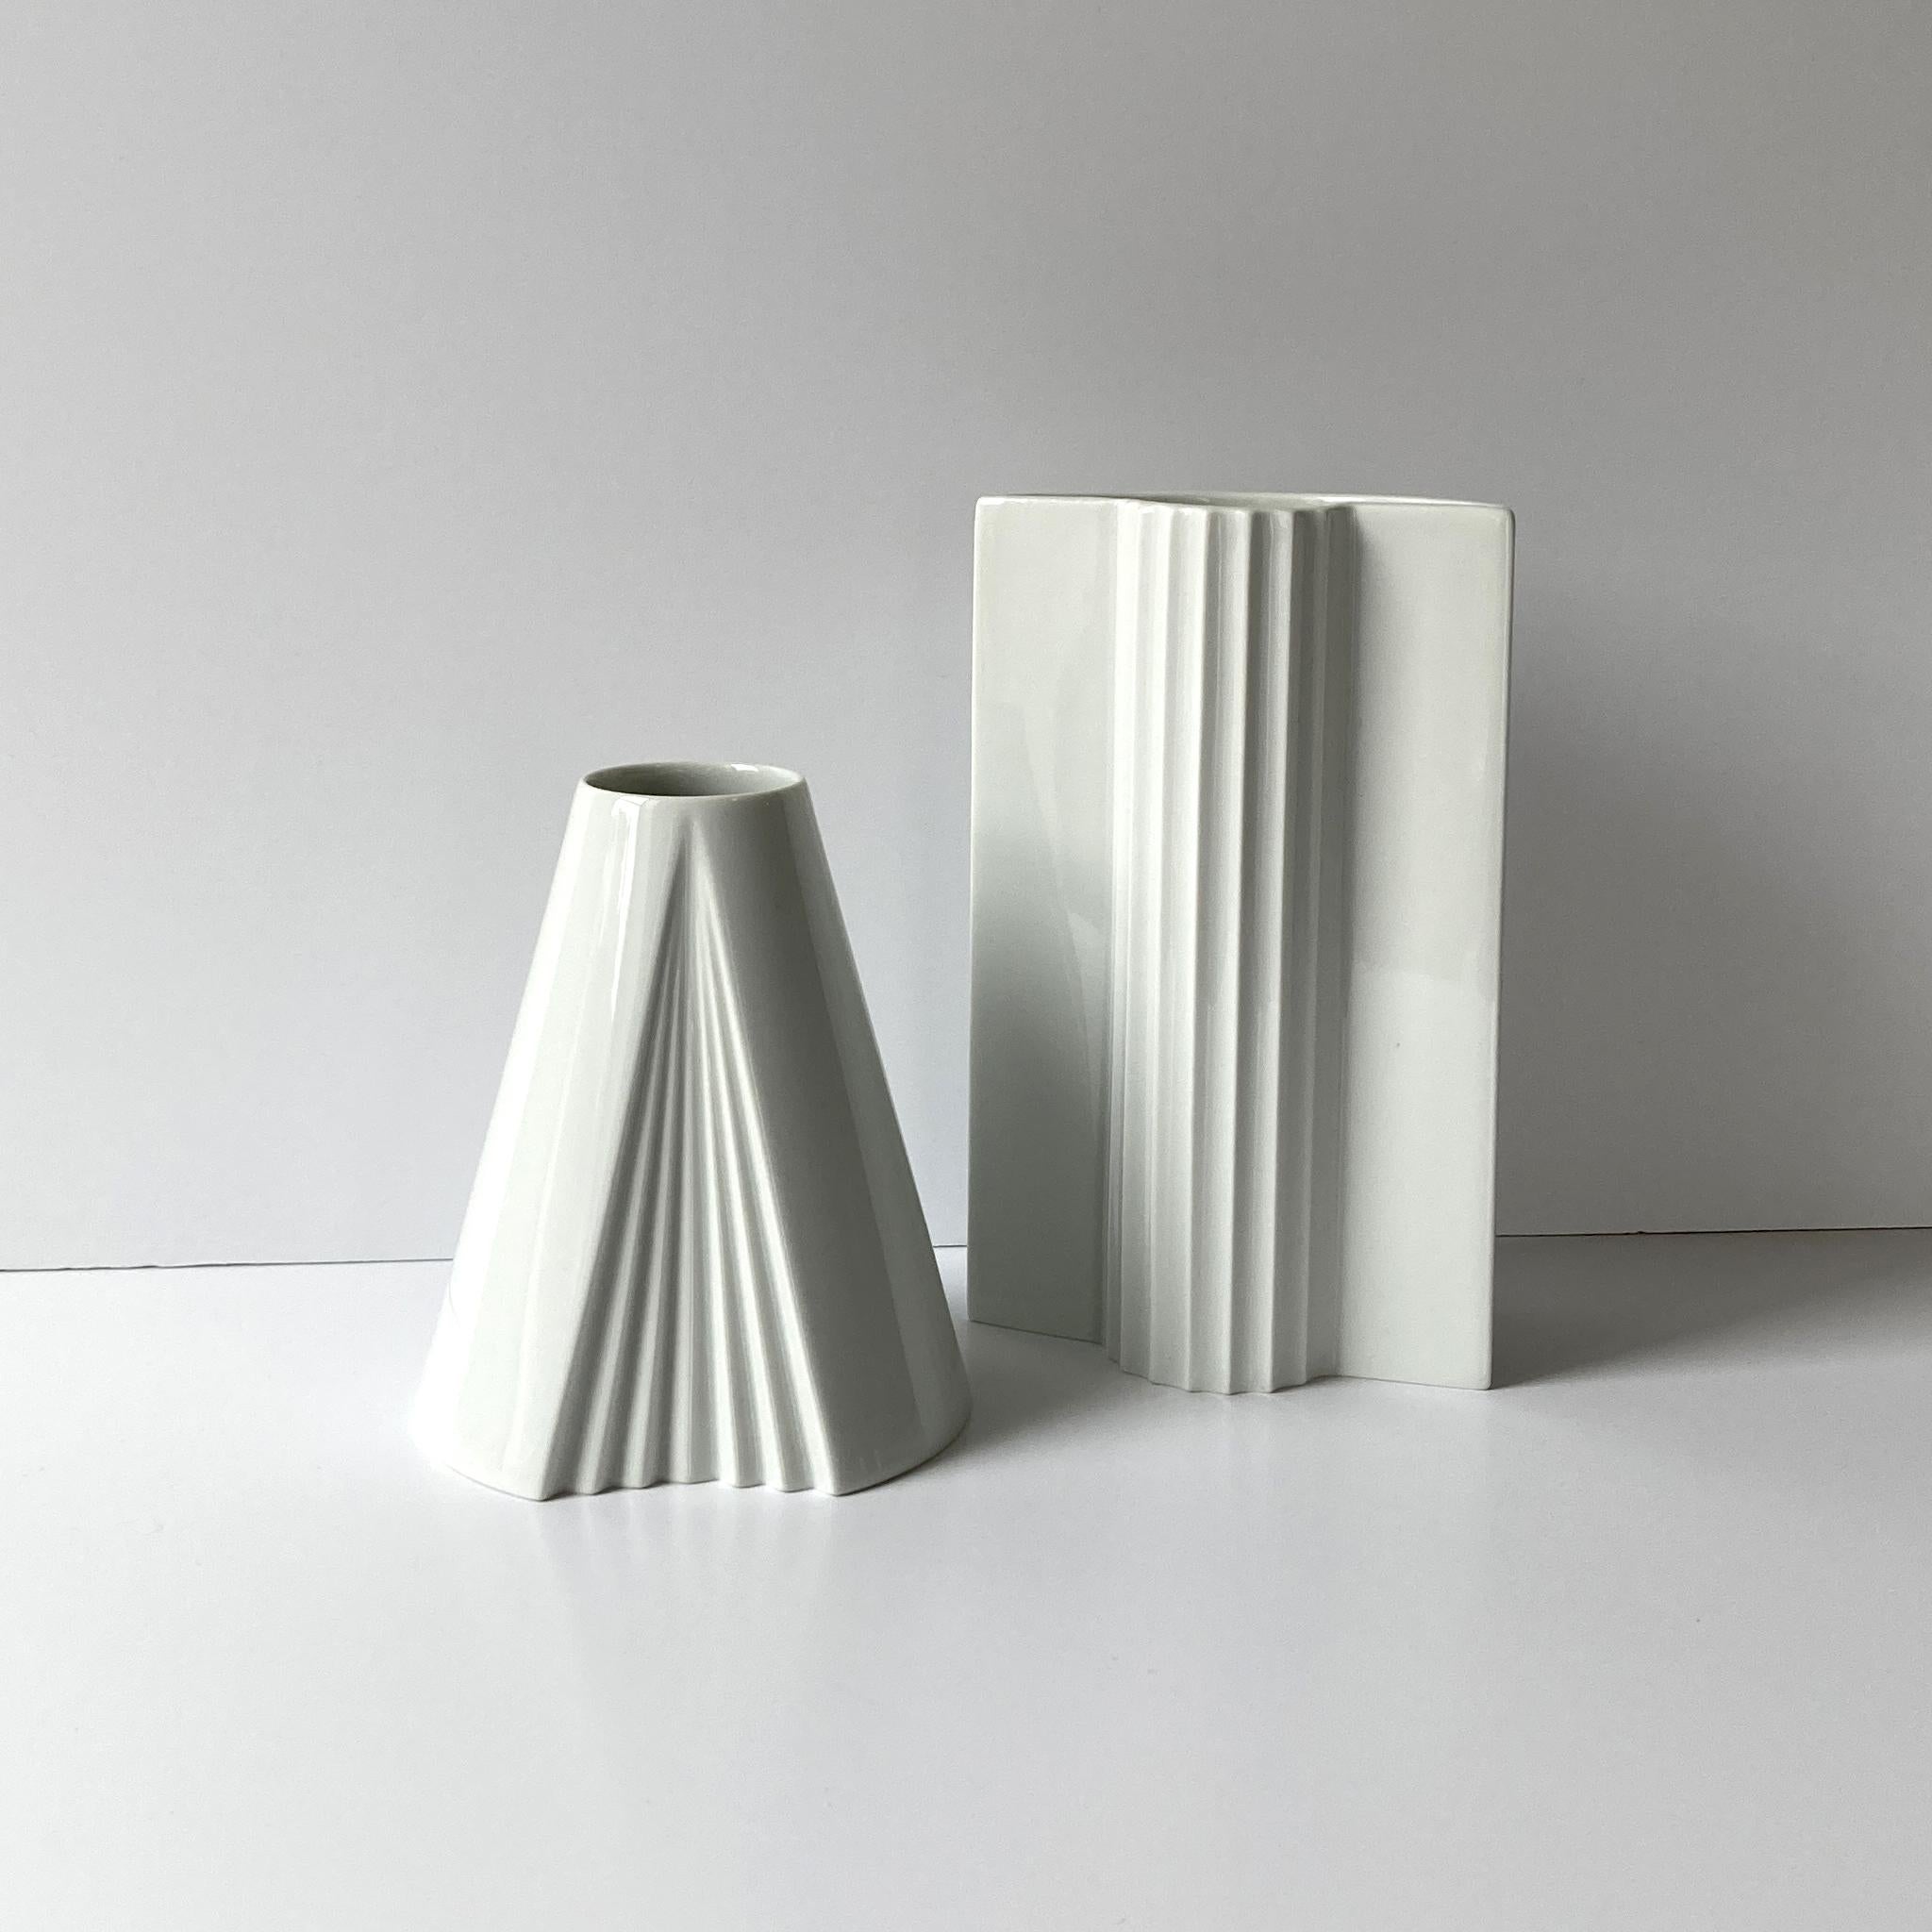 Stunning white porcelain vase by Thomas. The rounded pleat design catches light and shadow beautifully from different angles.

Measurements: H 8